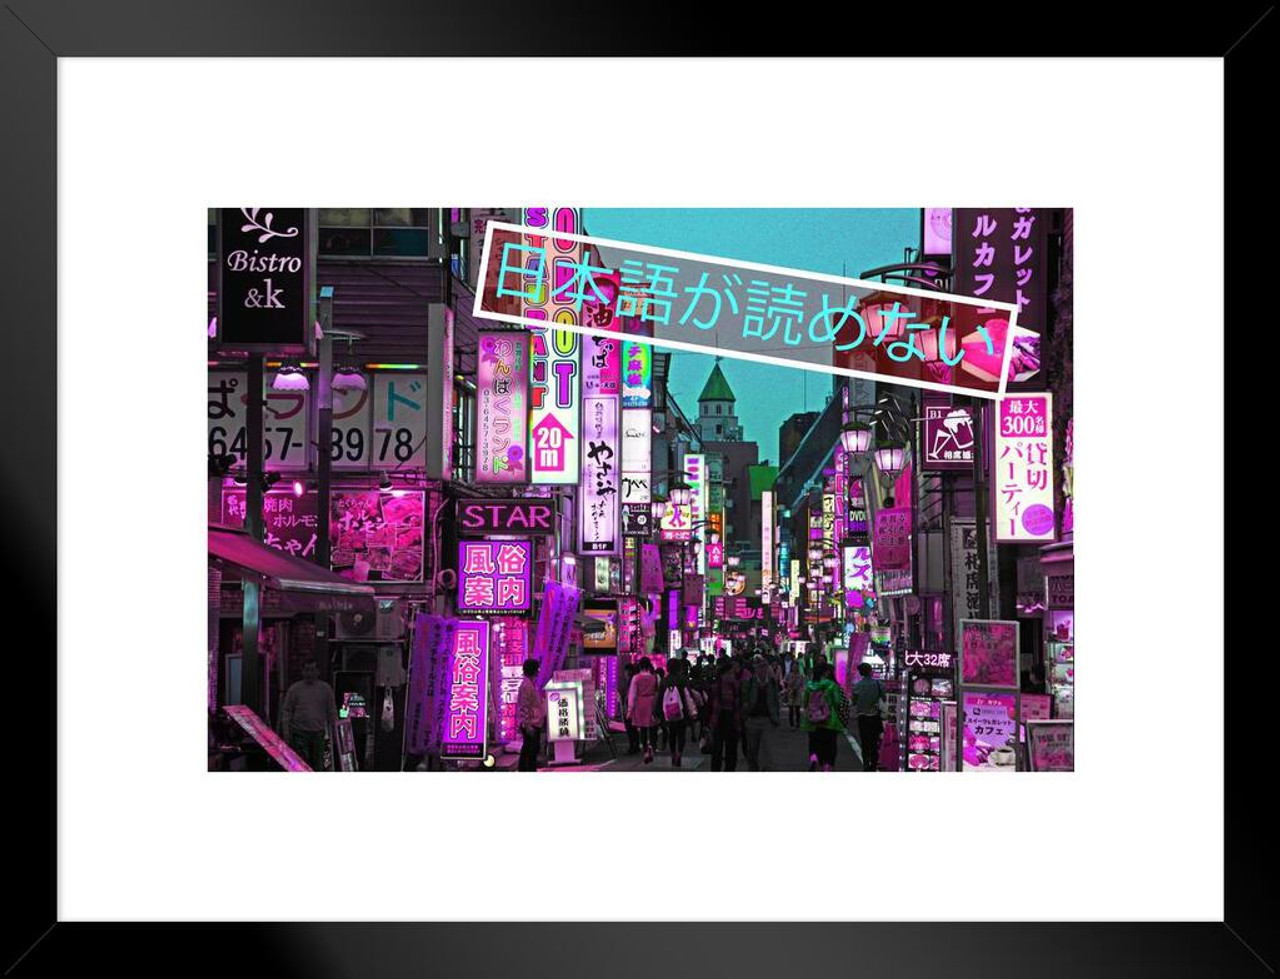 System Failure Japan Alley Photo Vaporwave Aesthetic Decor Retro Vintage  90s Y2K Room Decor Neon Pink Bedroom Decor Indie Vibey Aesthetic Teen  Bedroom Chill Matted Framed Art Wall Decor 20x26 - Poster